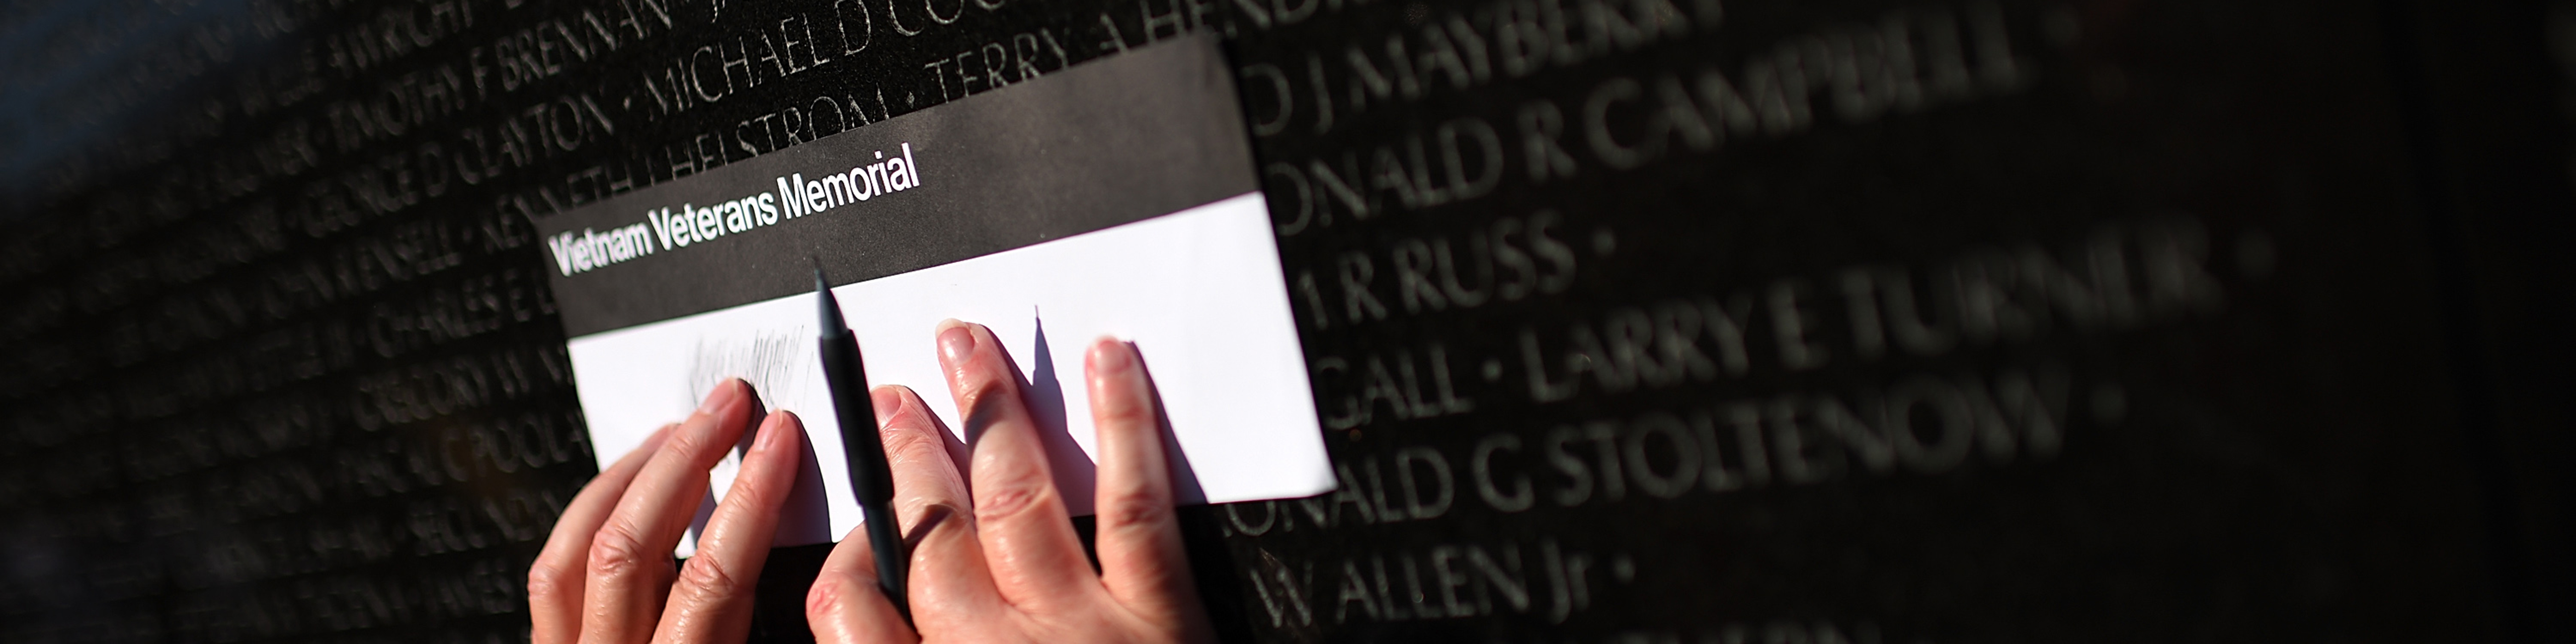 two hands hold a piece of paper up to the vietnam veterans memorial to make an etching of a name on the wall